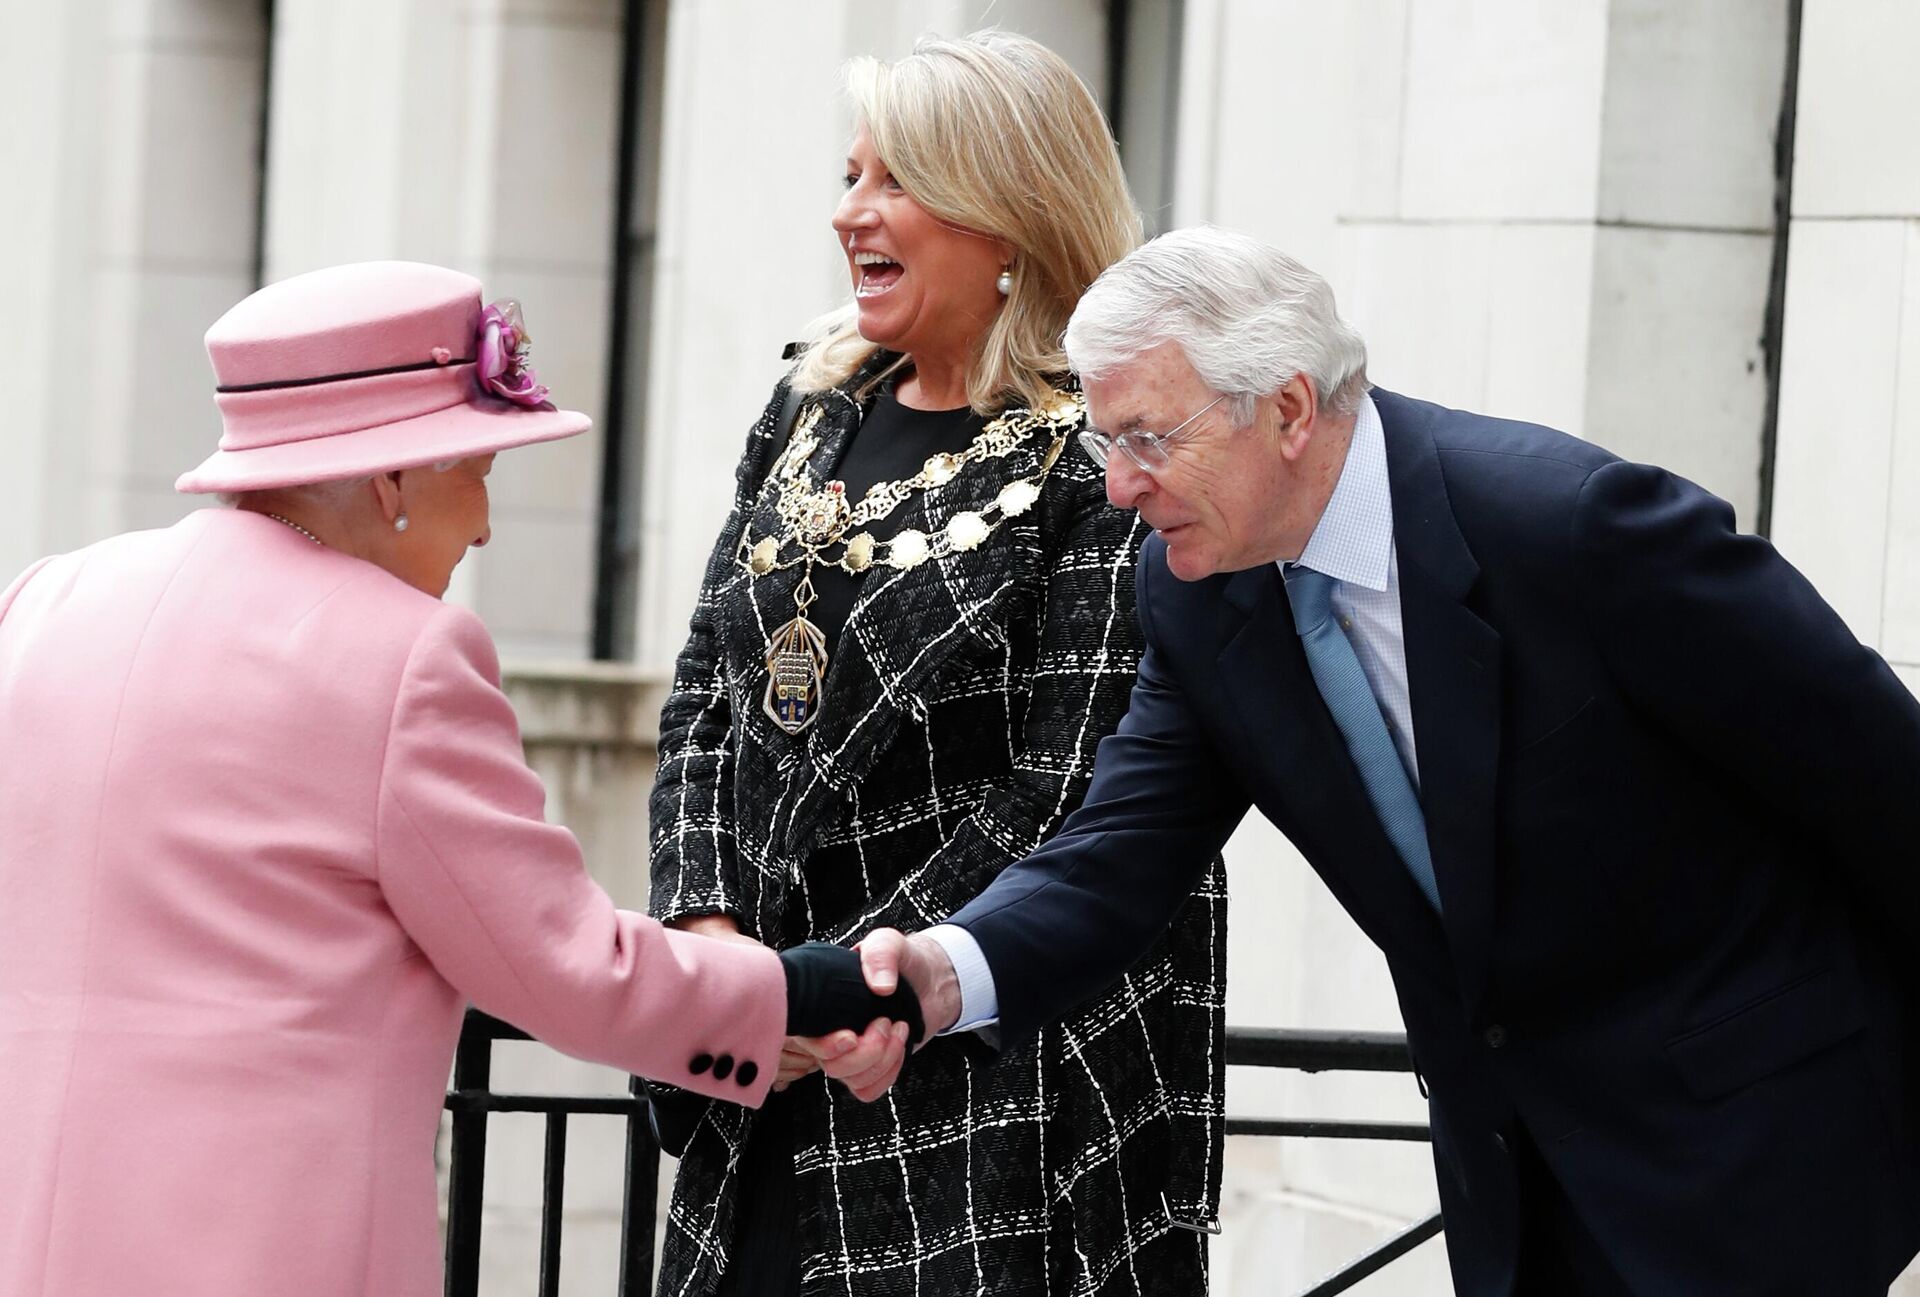 Britain's Queen Elizabeth II is greeted by former British Prime Minister John Major at Kings College in London, Tuesday, March 19, 2019. The Queen and Kate Duchess of Cambridge, will visit King's College London, Tuesday, to open Bush House, the latest education and learning facilities on the Strand Campus. - Sputnik International, 1920, 09.09.2022